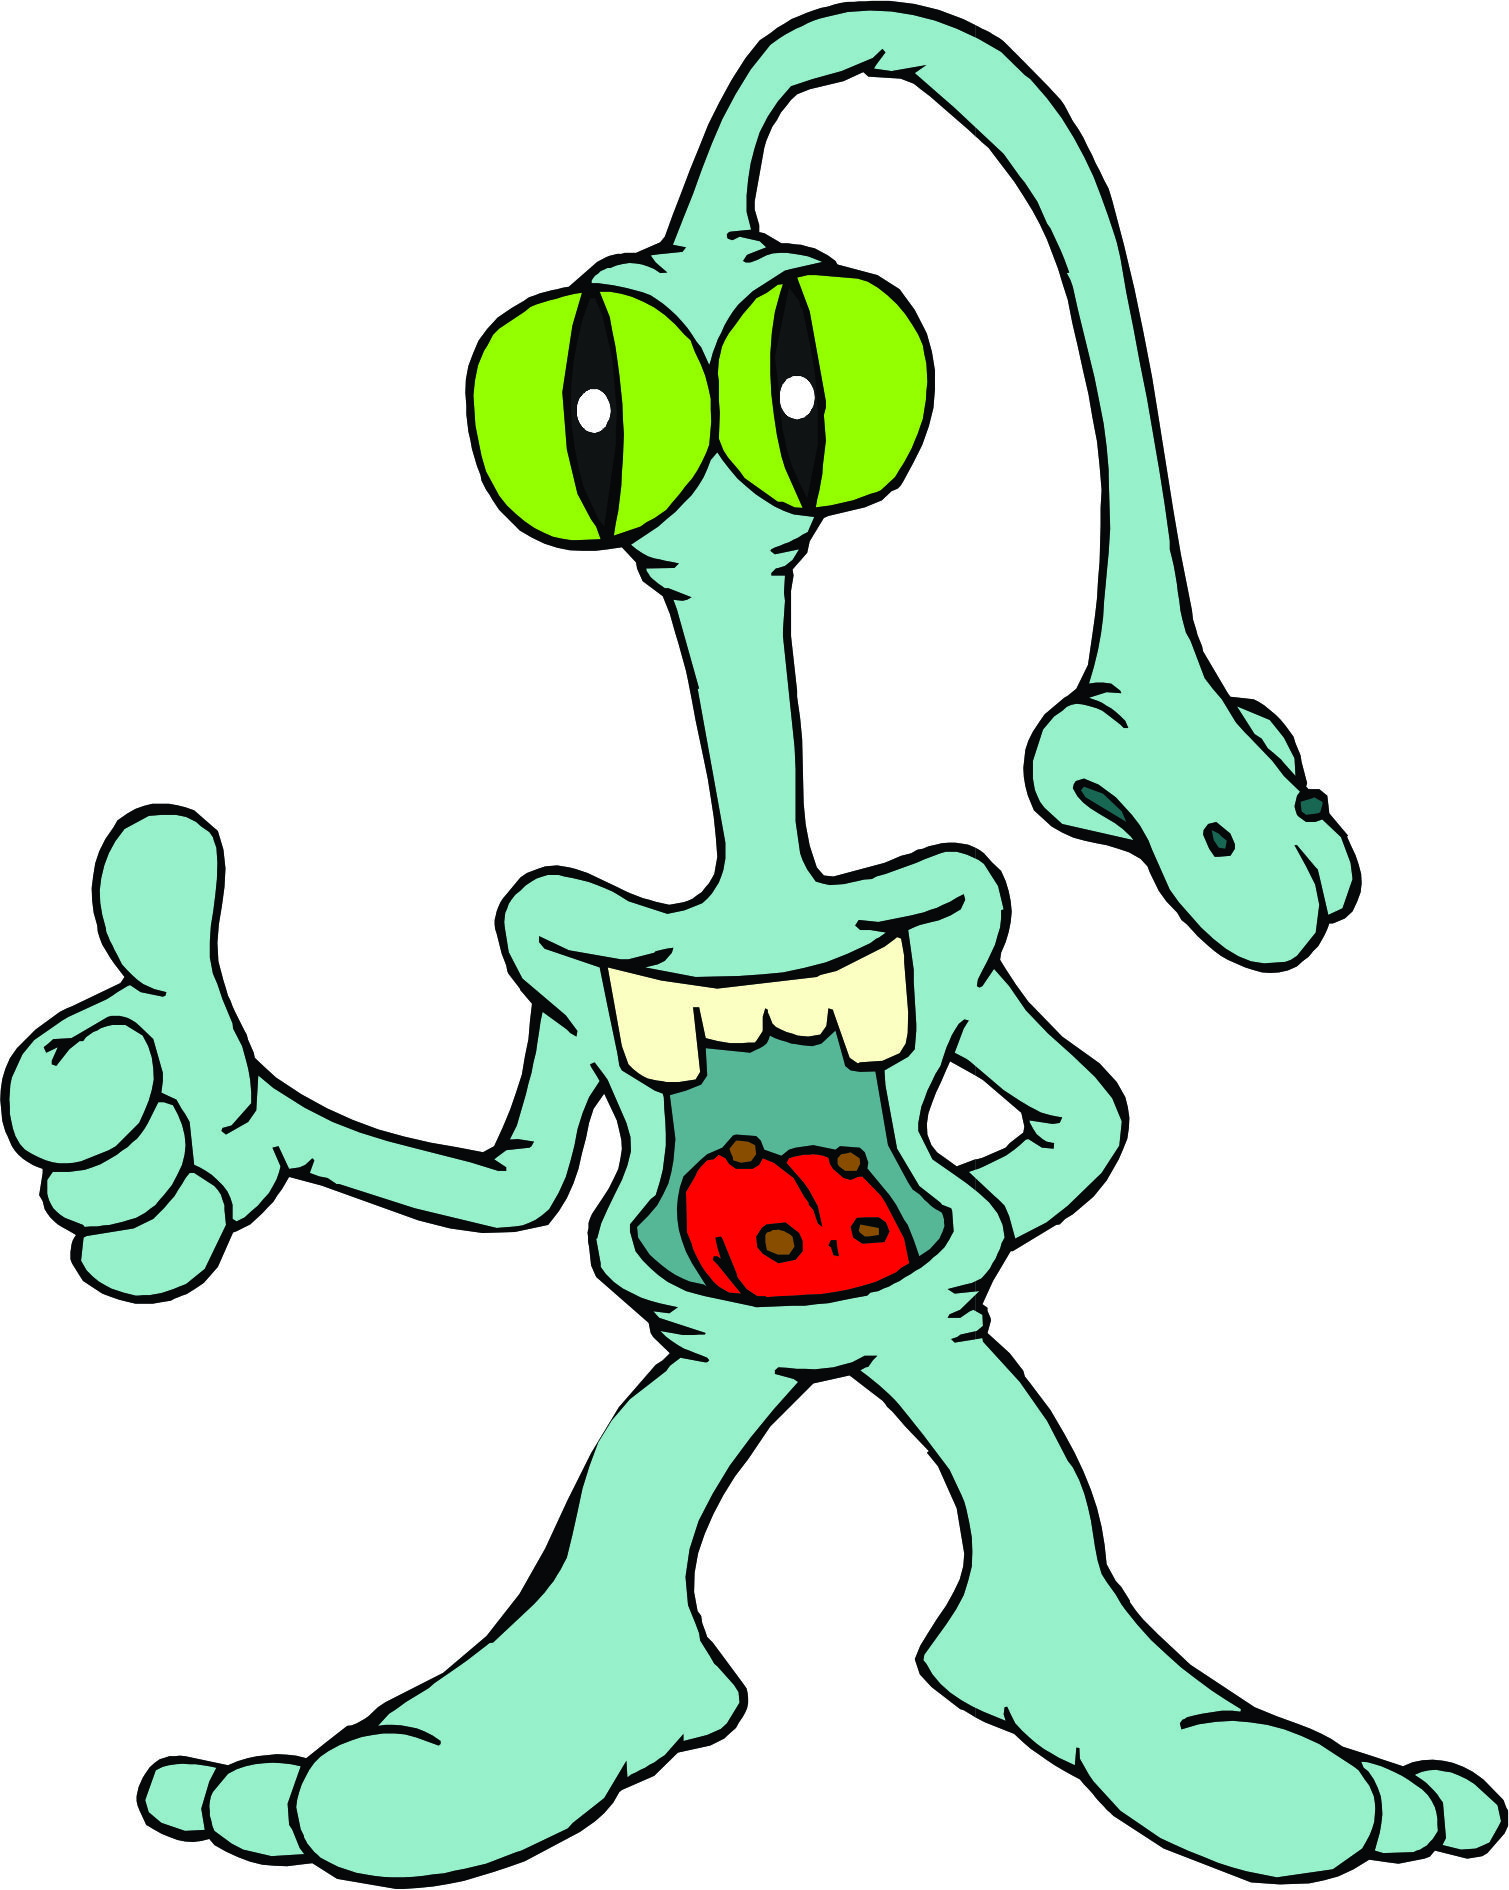 Cartoon Aliens - Clipart library - Clipart library